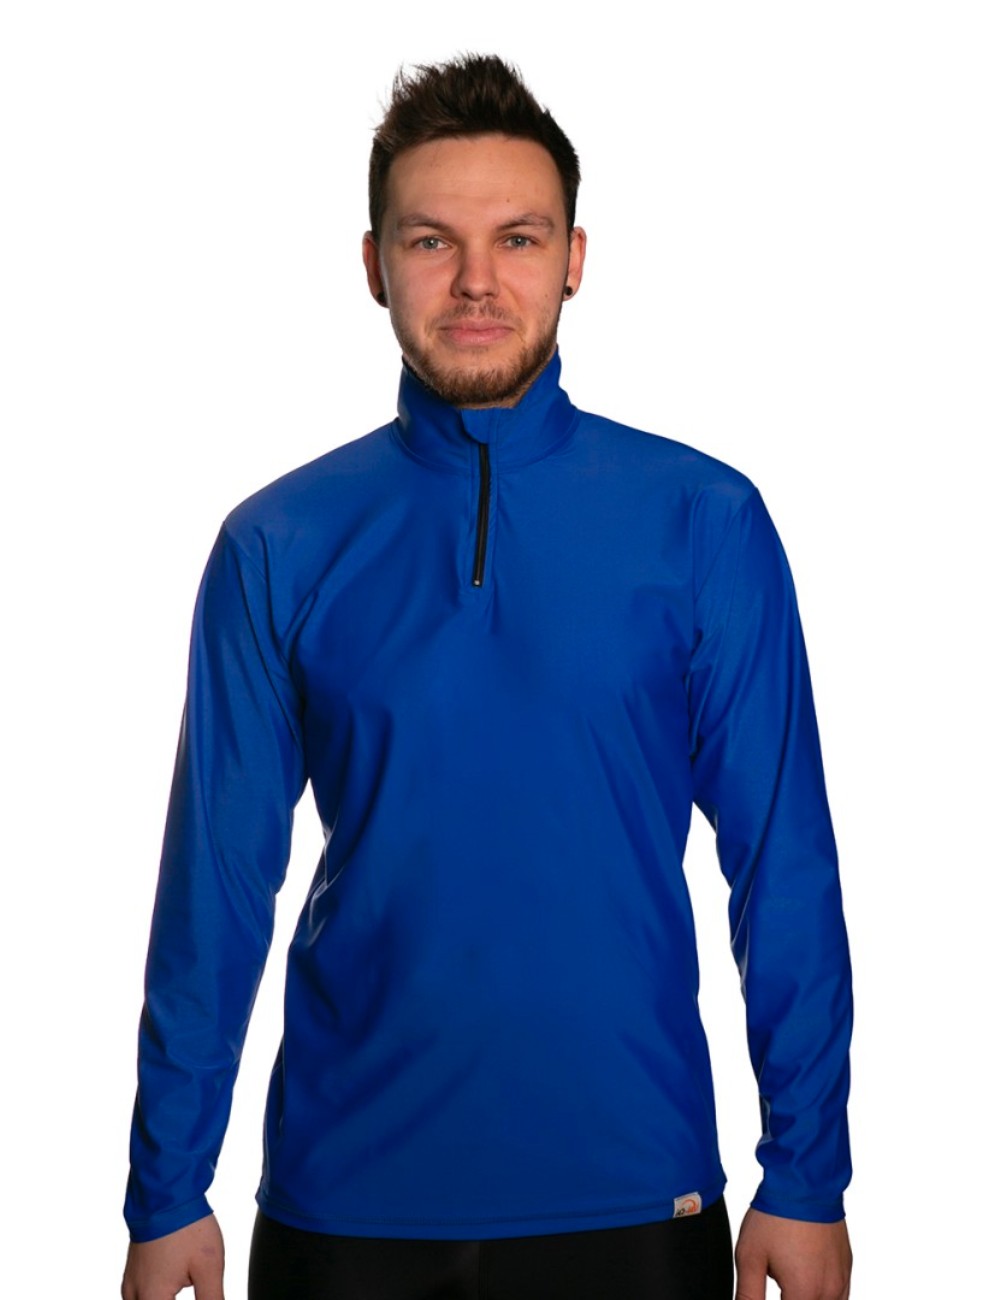 Men's long-sleeved shirt with zip fastening Water sports and leisure